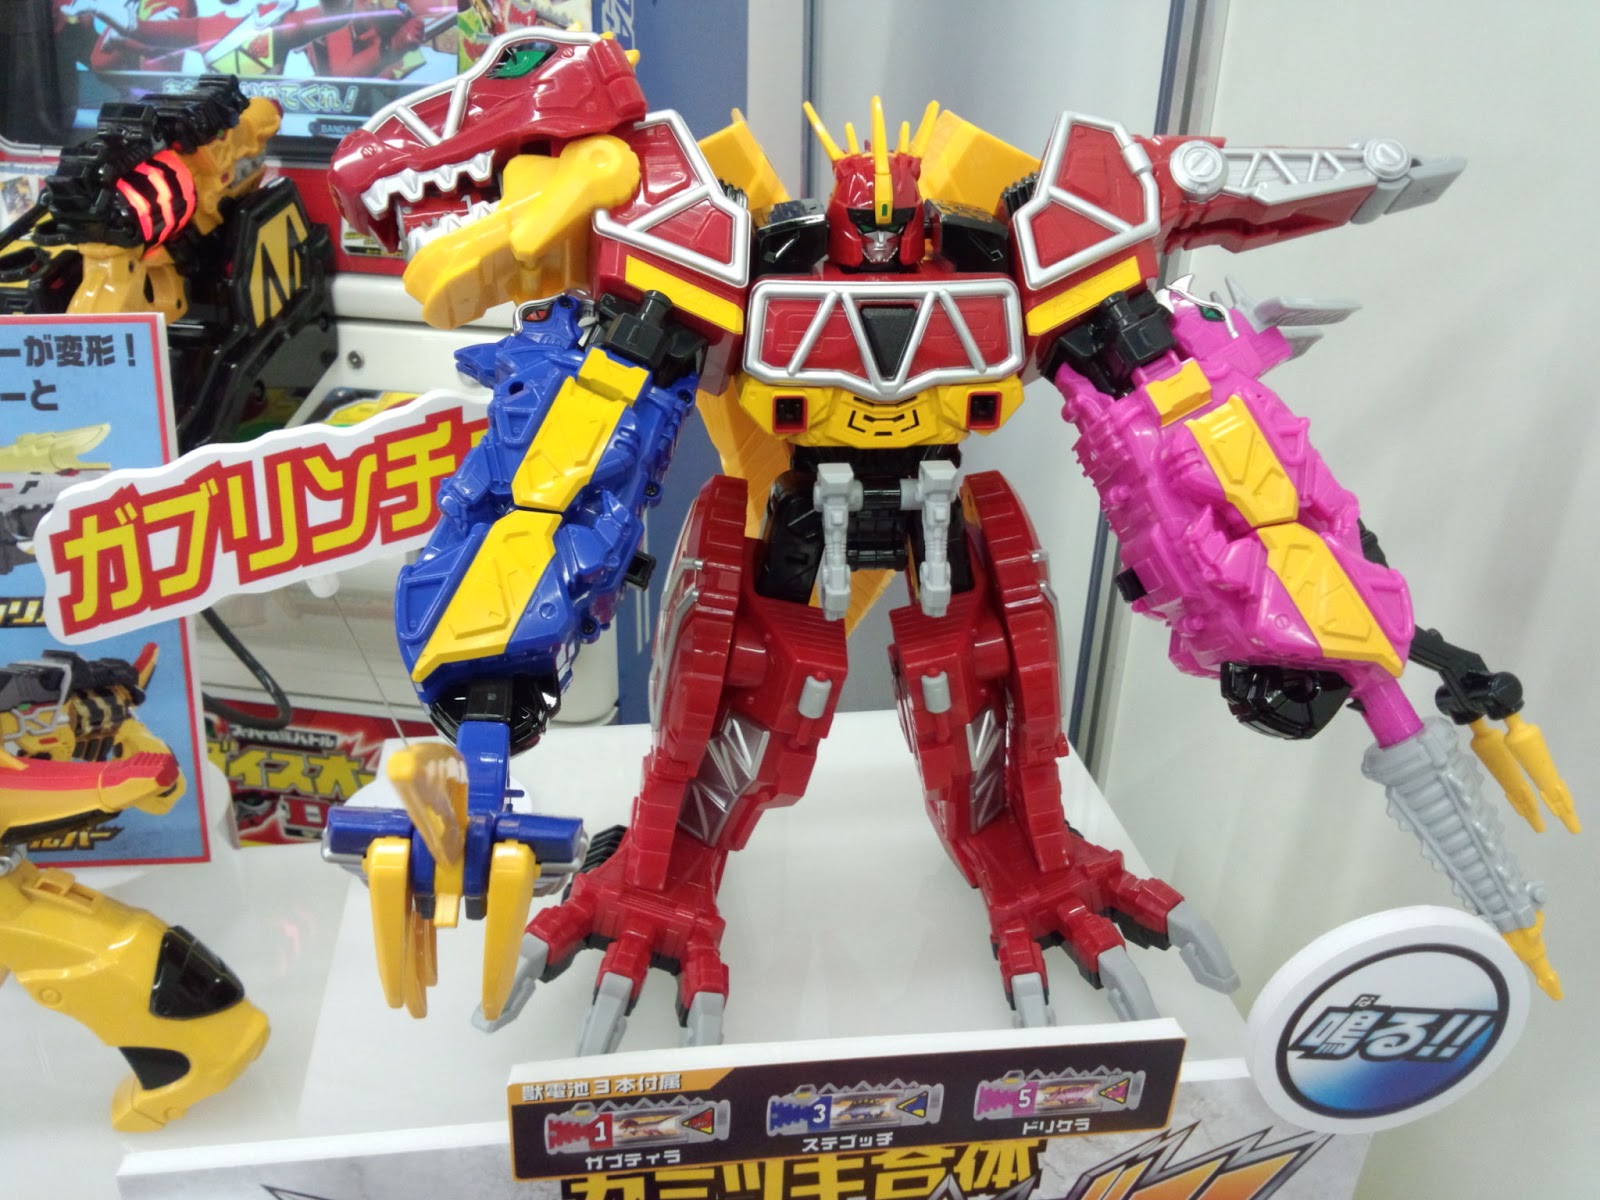 The center of anime and toku: Kyoryuger's Kyoryuzin Toy Demo